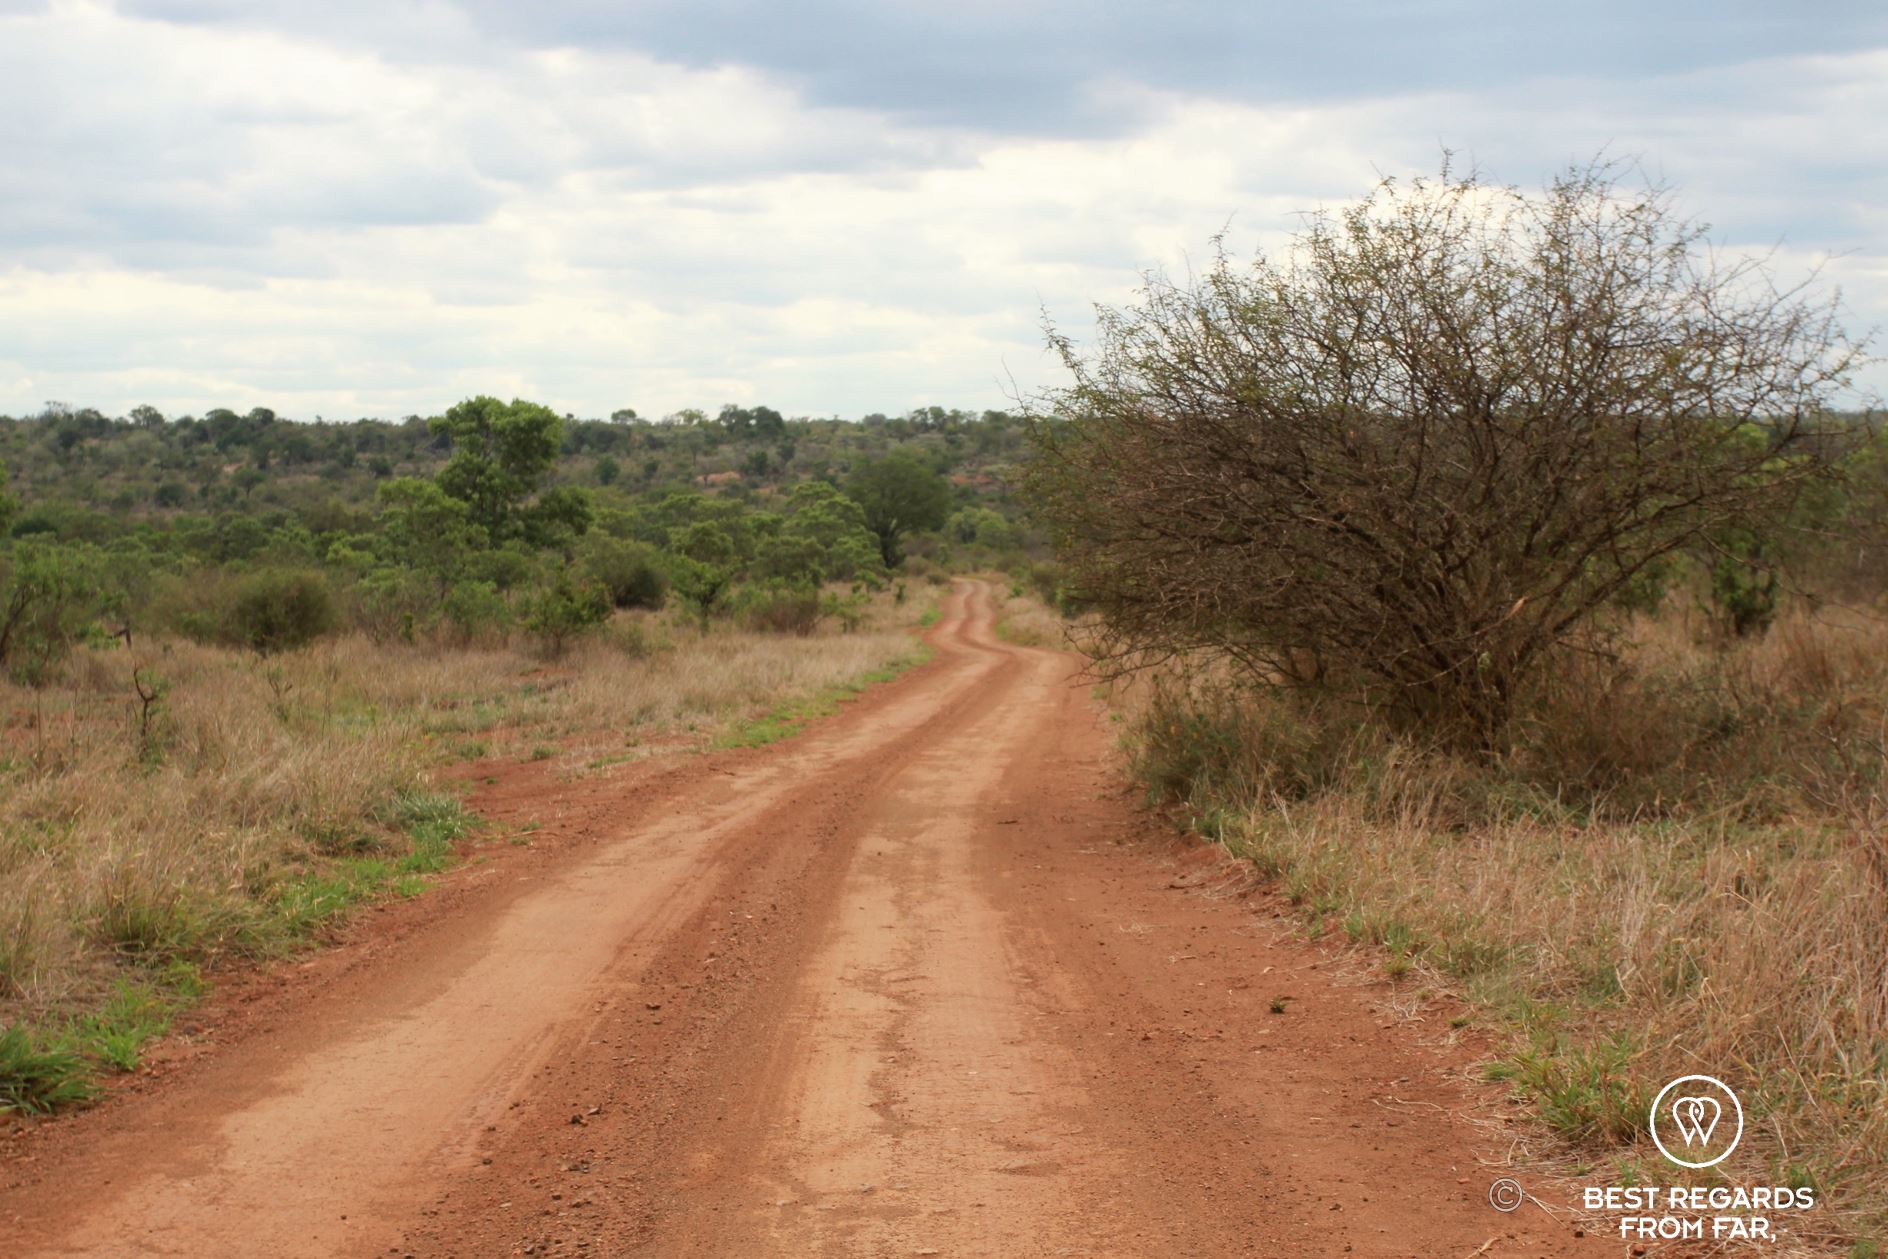 Dirt road through the savannah in the Kruger Park South Africa.